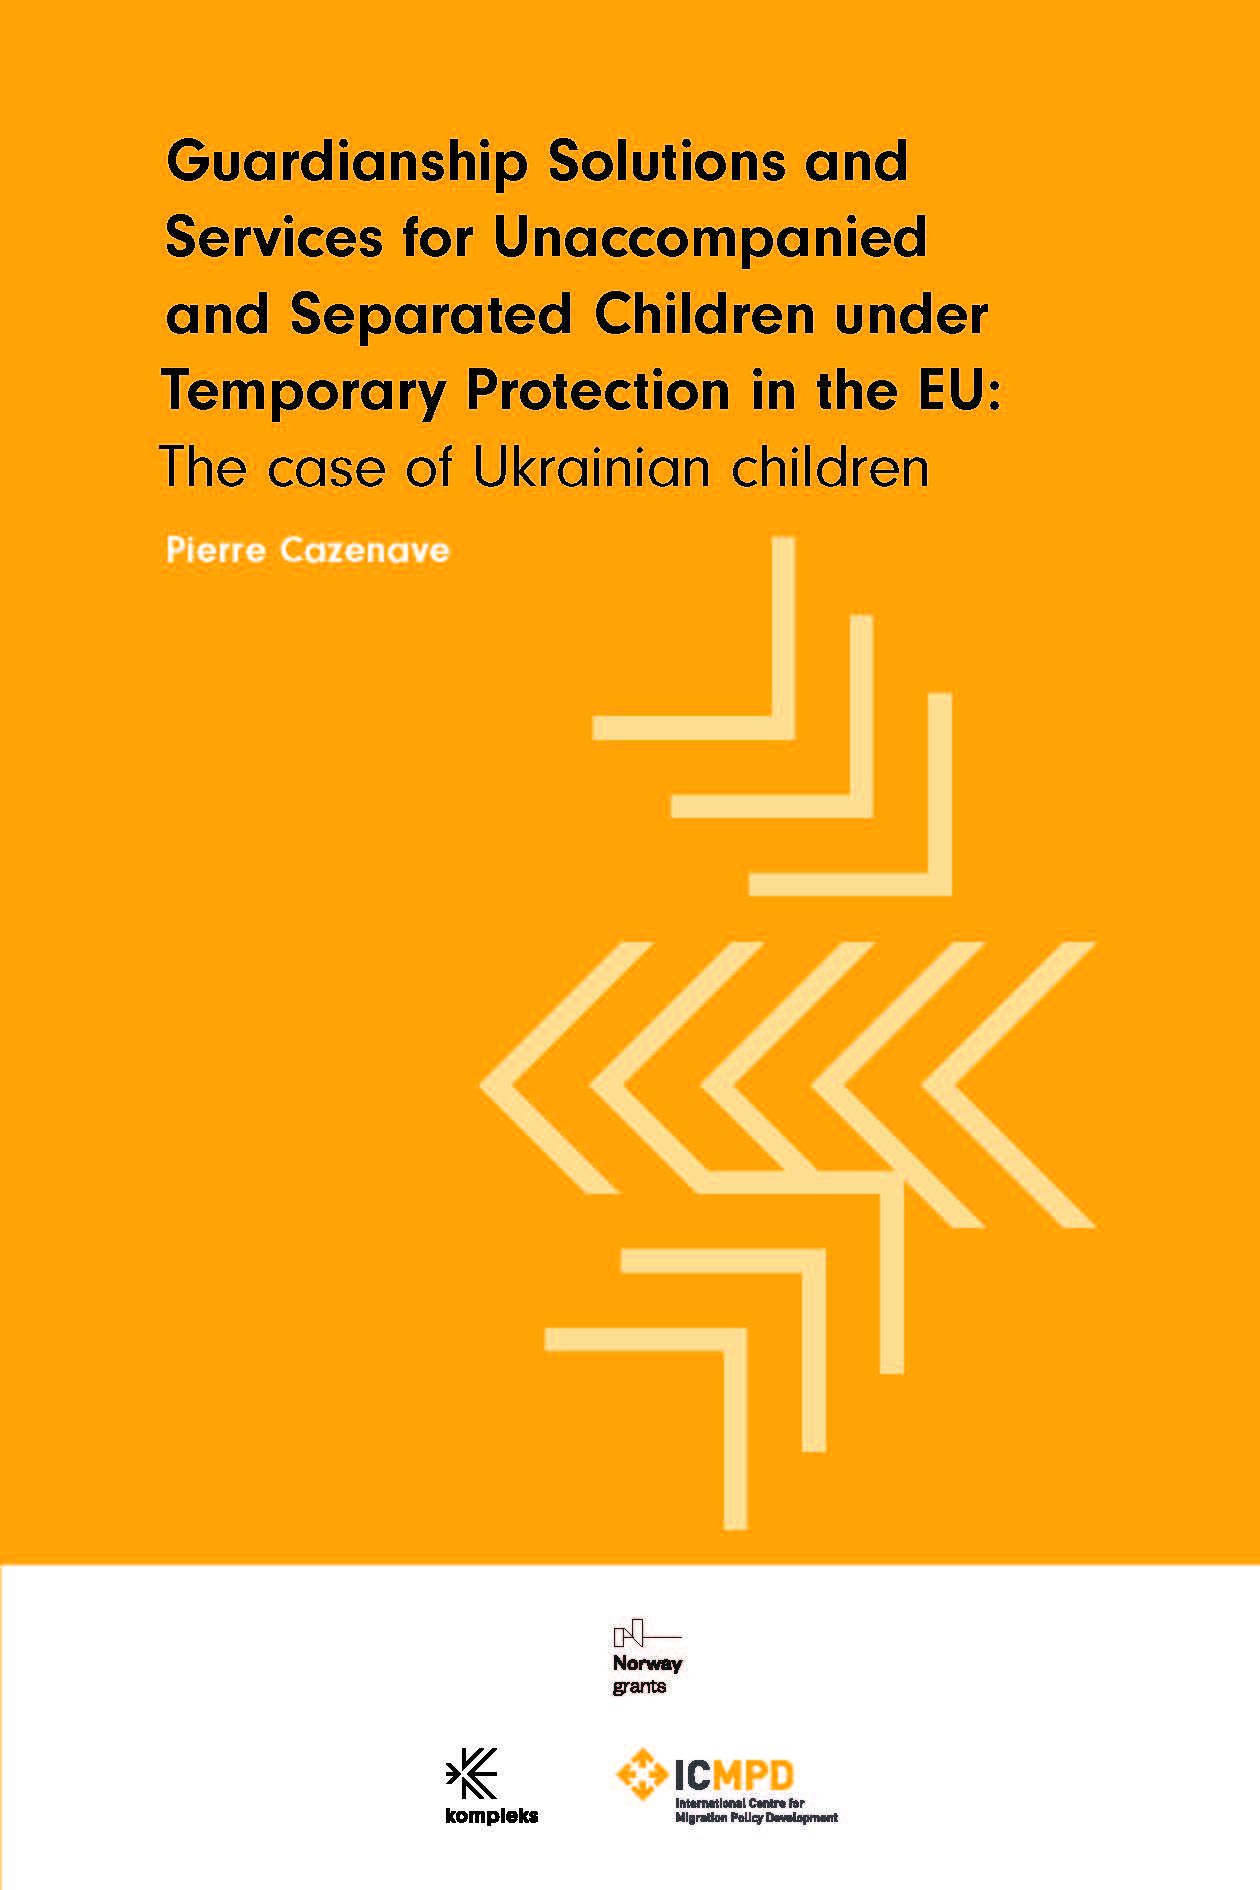 Guardianship Solutions and Services for Unaccompanied and Separated Children under Temporary Protection in the EU_Page_01.jpg